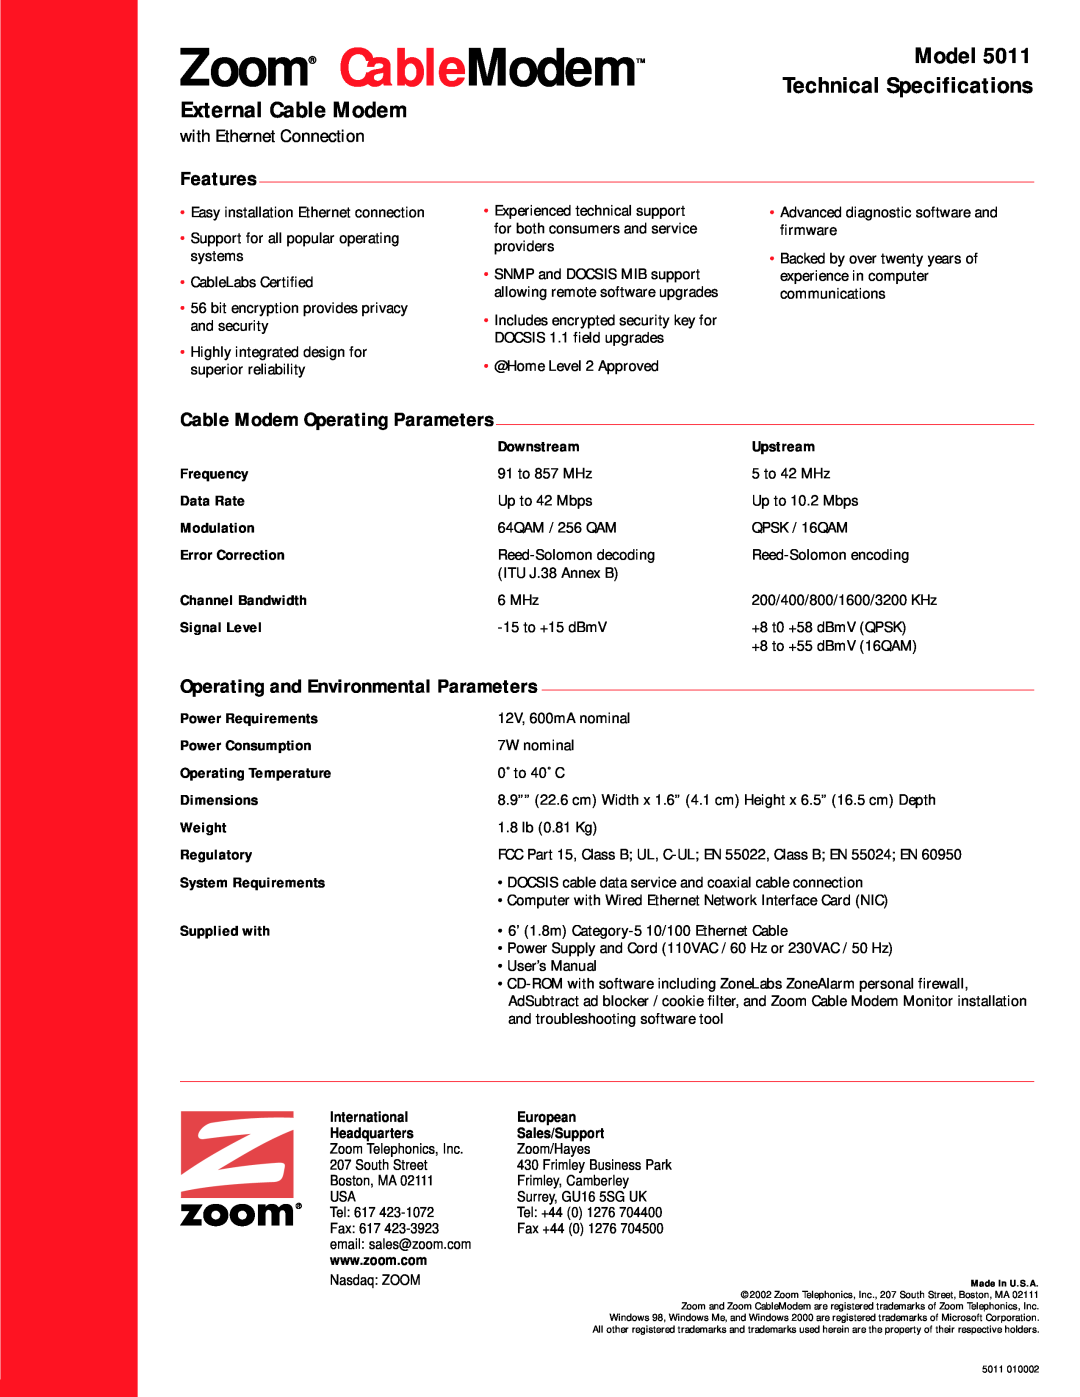 Zoom 5011 user manual Zoom CableModem, Model, Technical Specifications, Features, Cable Modem Operating Parameters 